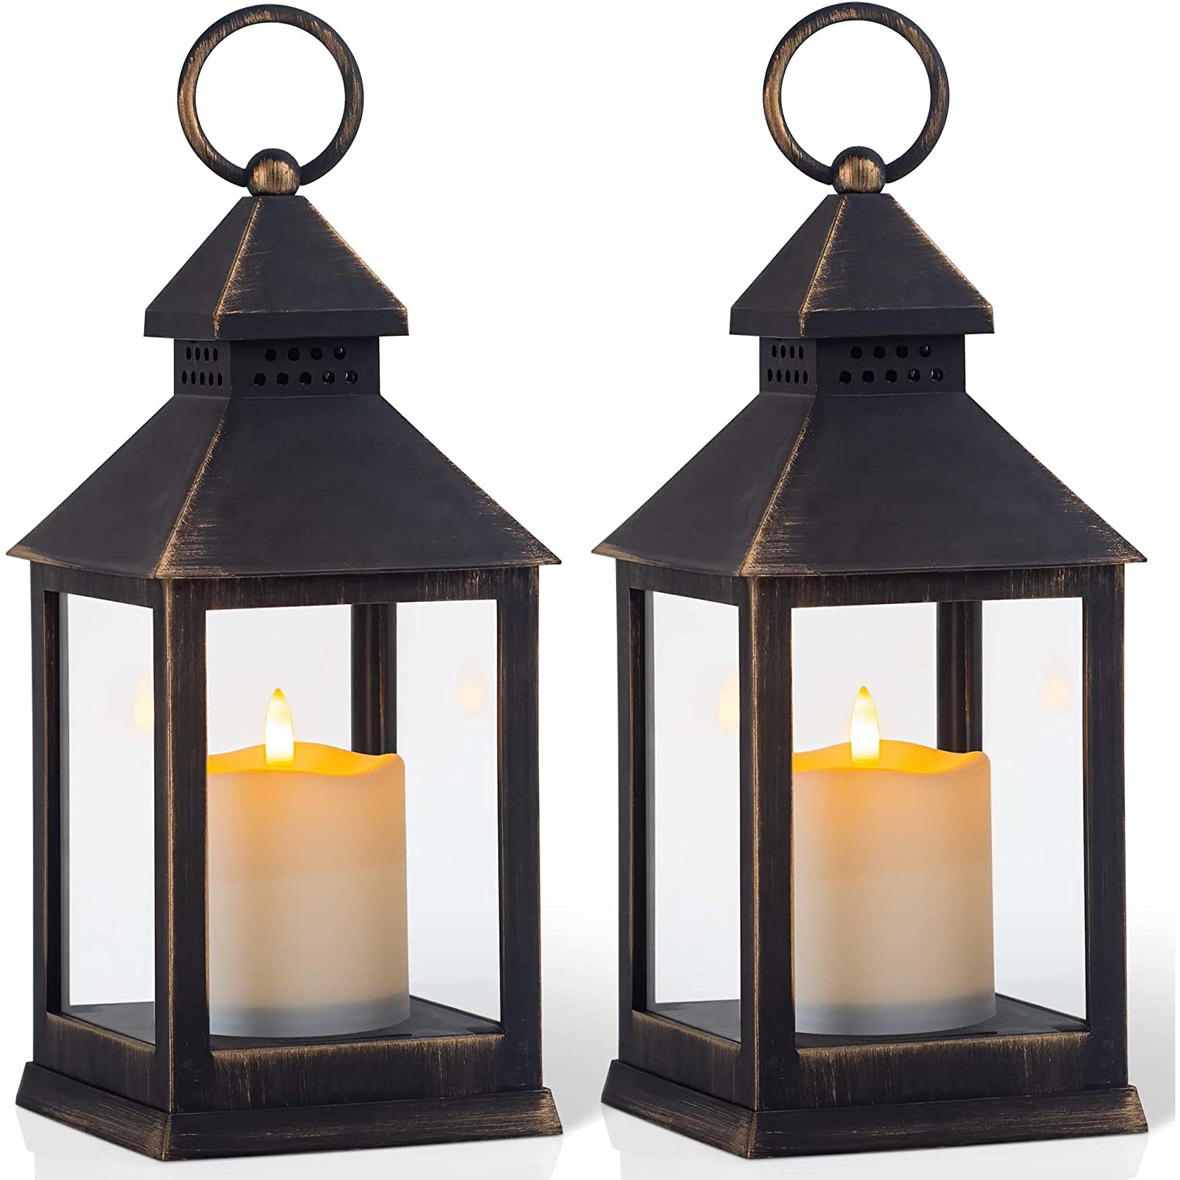 Yongmao Vintage Golden Brushed Black Lantern Decorative LED Flickering Flameless Candle with Timer, Battery Powered LED Decorative Hanging Lanterns for Indoor Outdoor Garden Yard Home Decor(2 Pack)